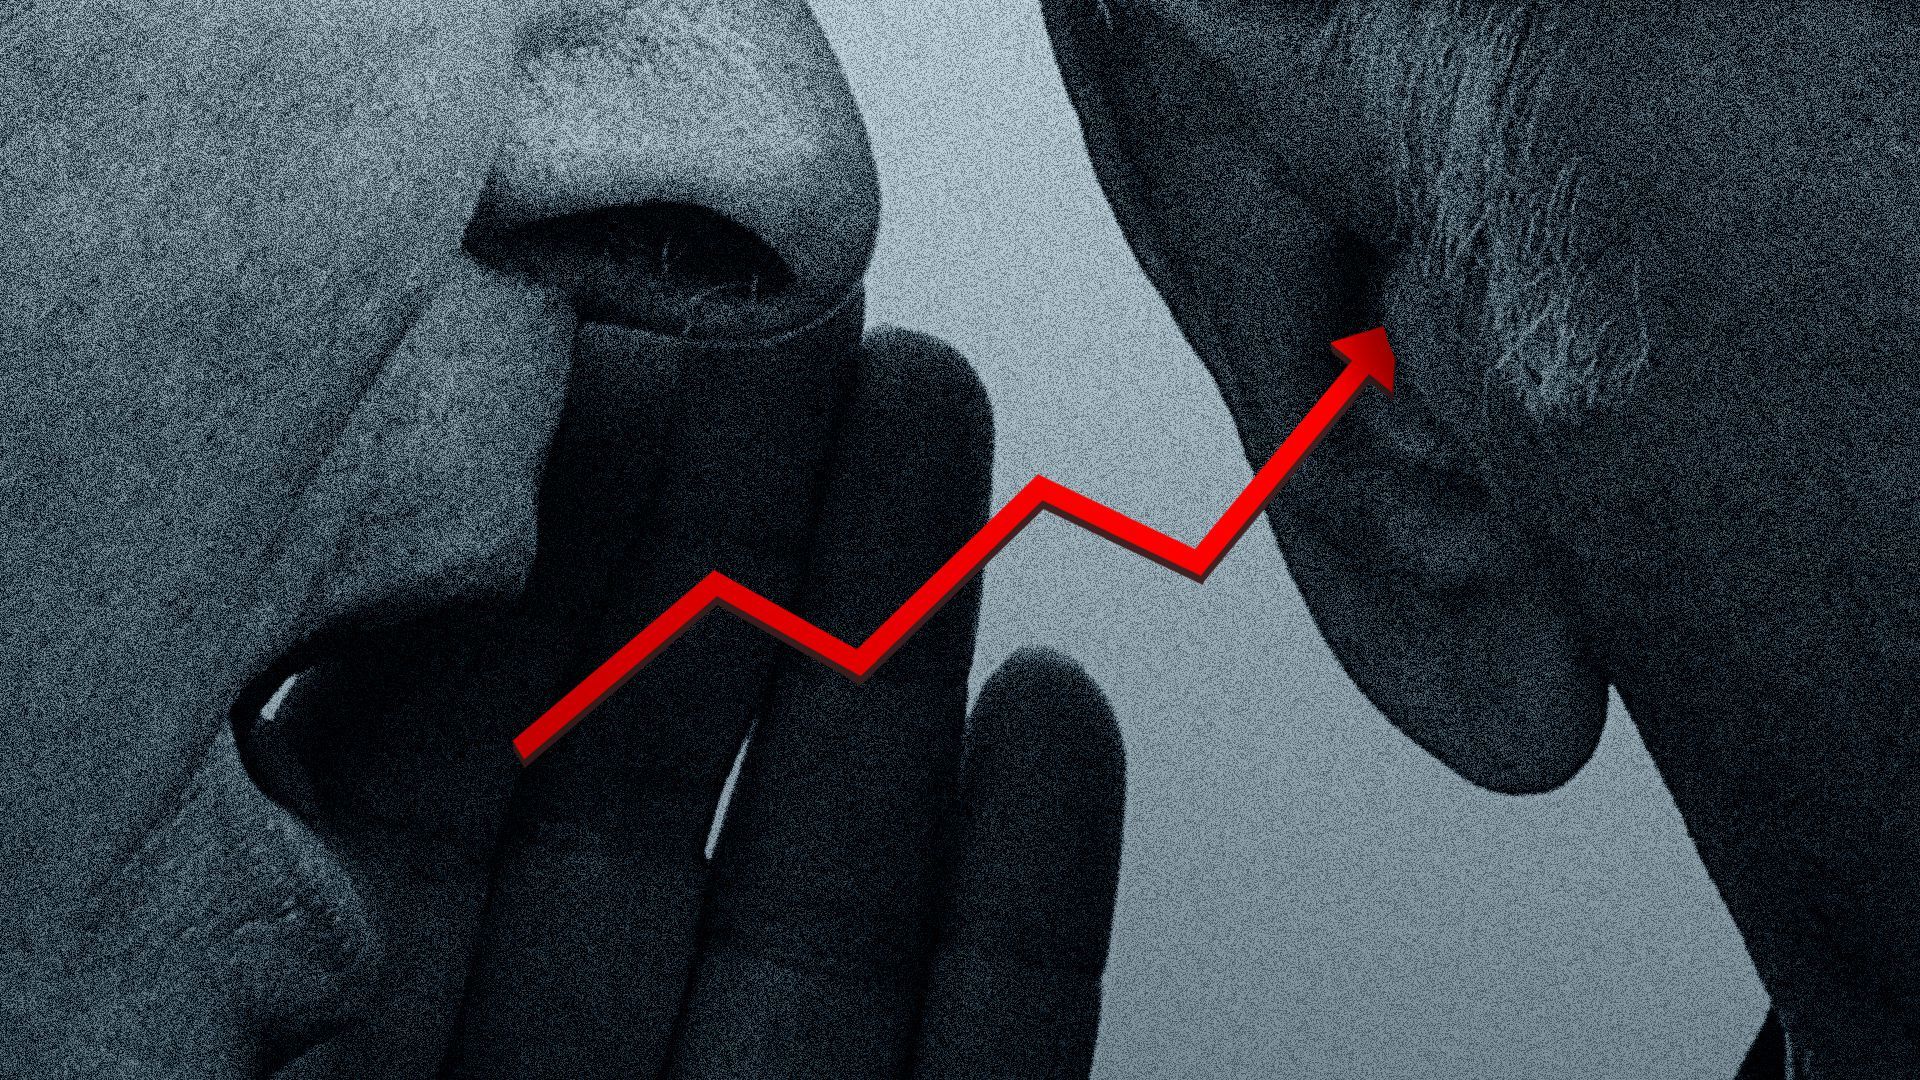 Illustration of one businessperson whispering a stock trend line into another person's ear